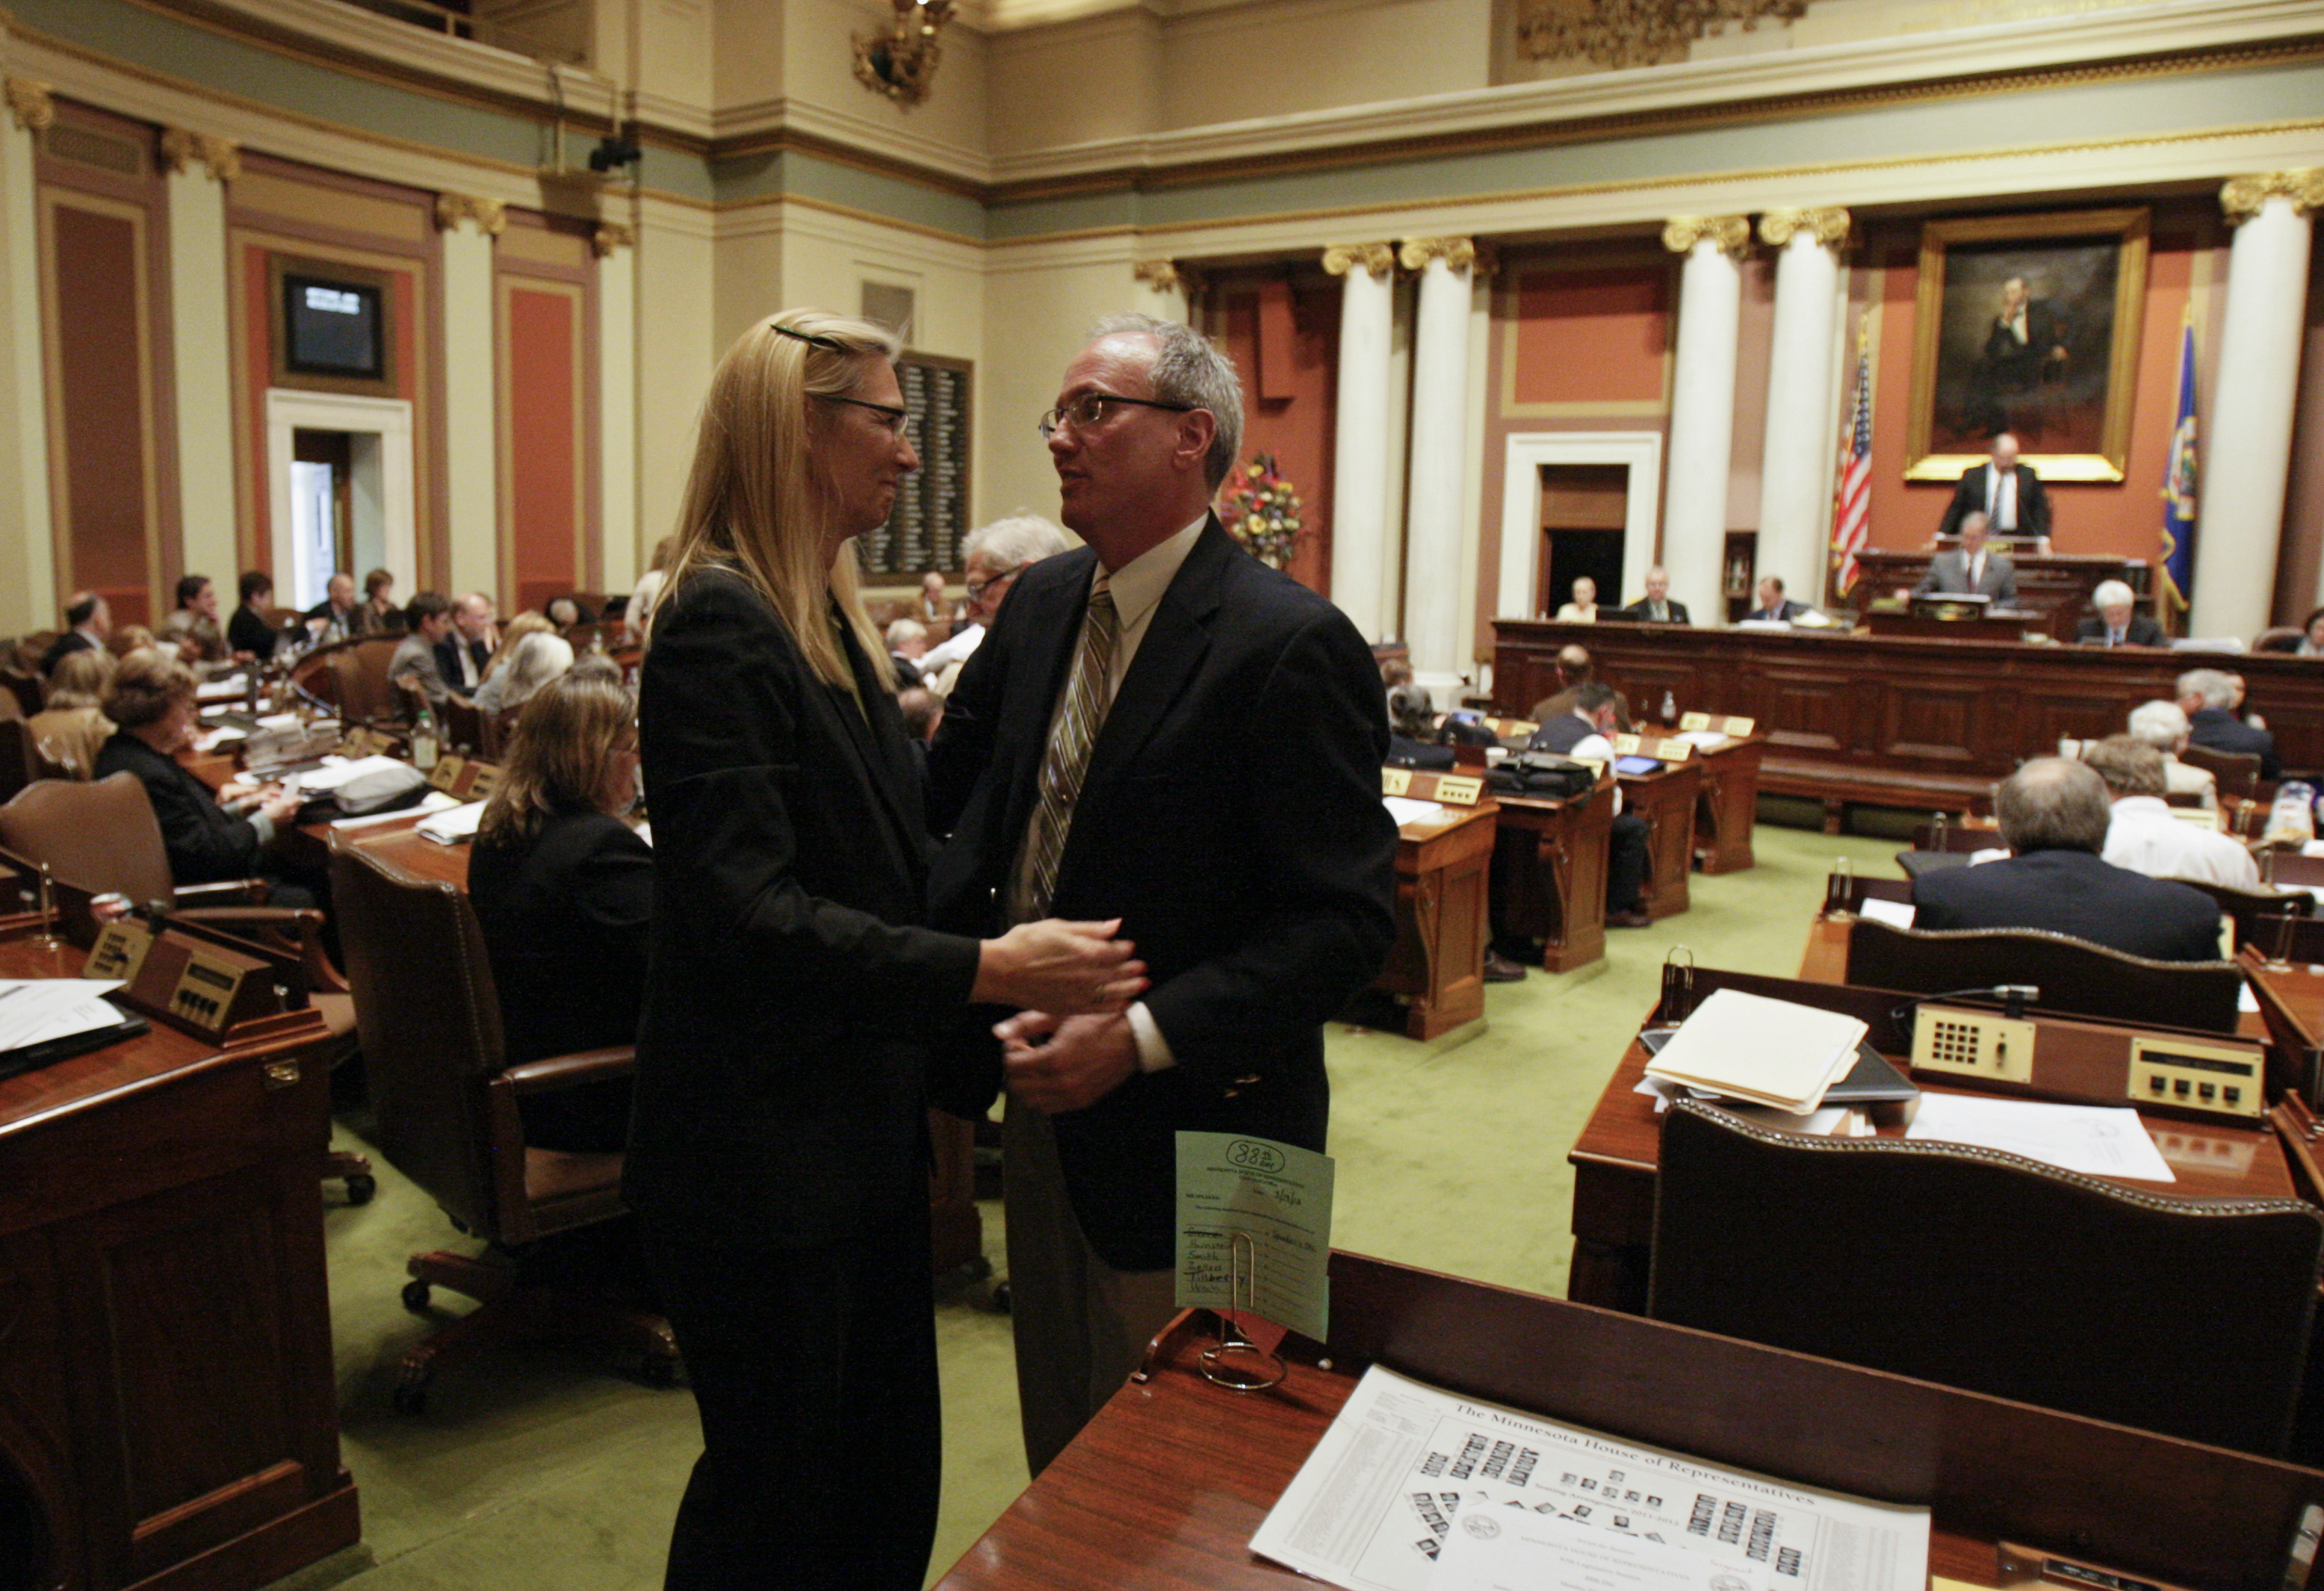 Rep. Denise Dittrich congratulates Rep. Tim O’Driscoll after his bill that would transfer management of the Permanent School Fund lands to five members appointed by the governor was passed by the House March 19. (Photo by Paul Battaglia)